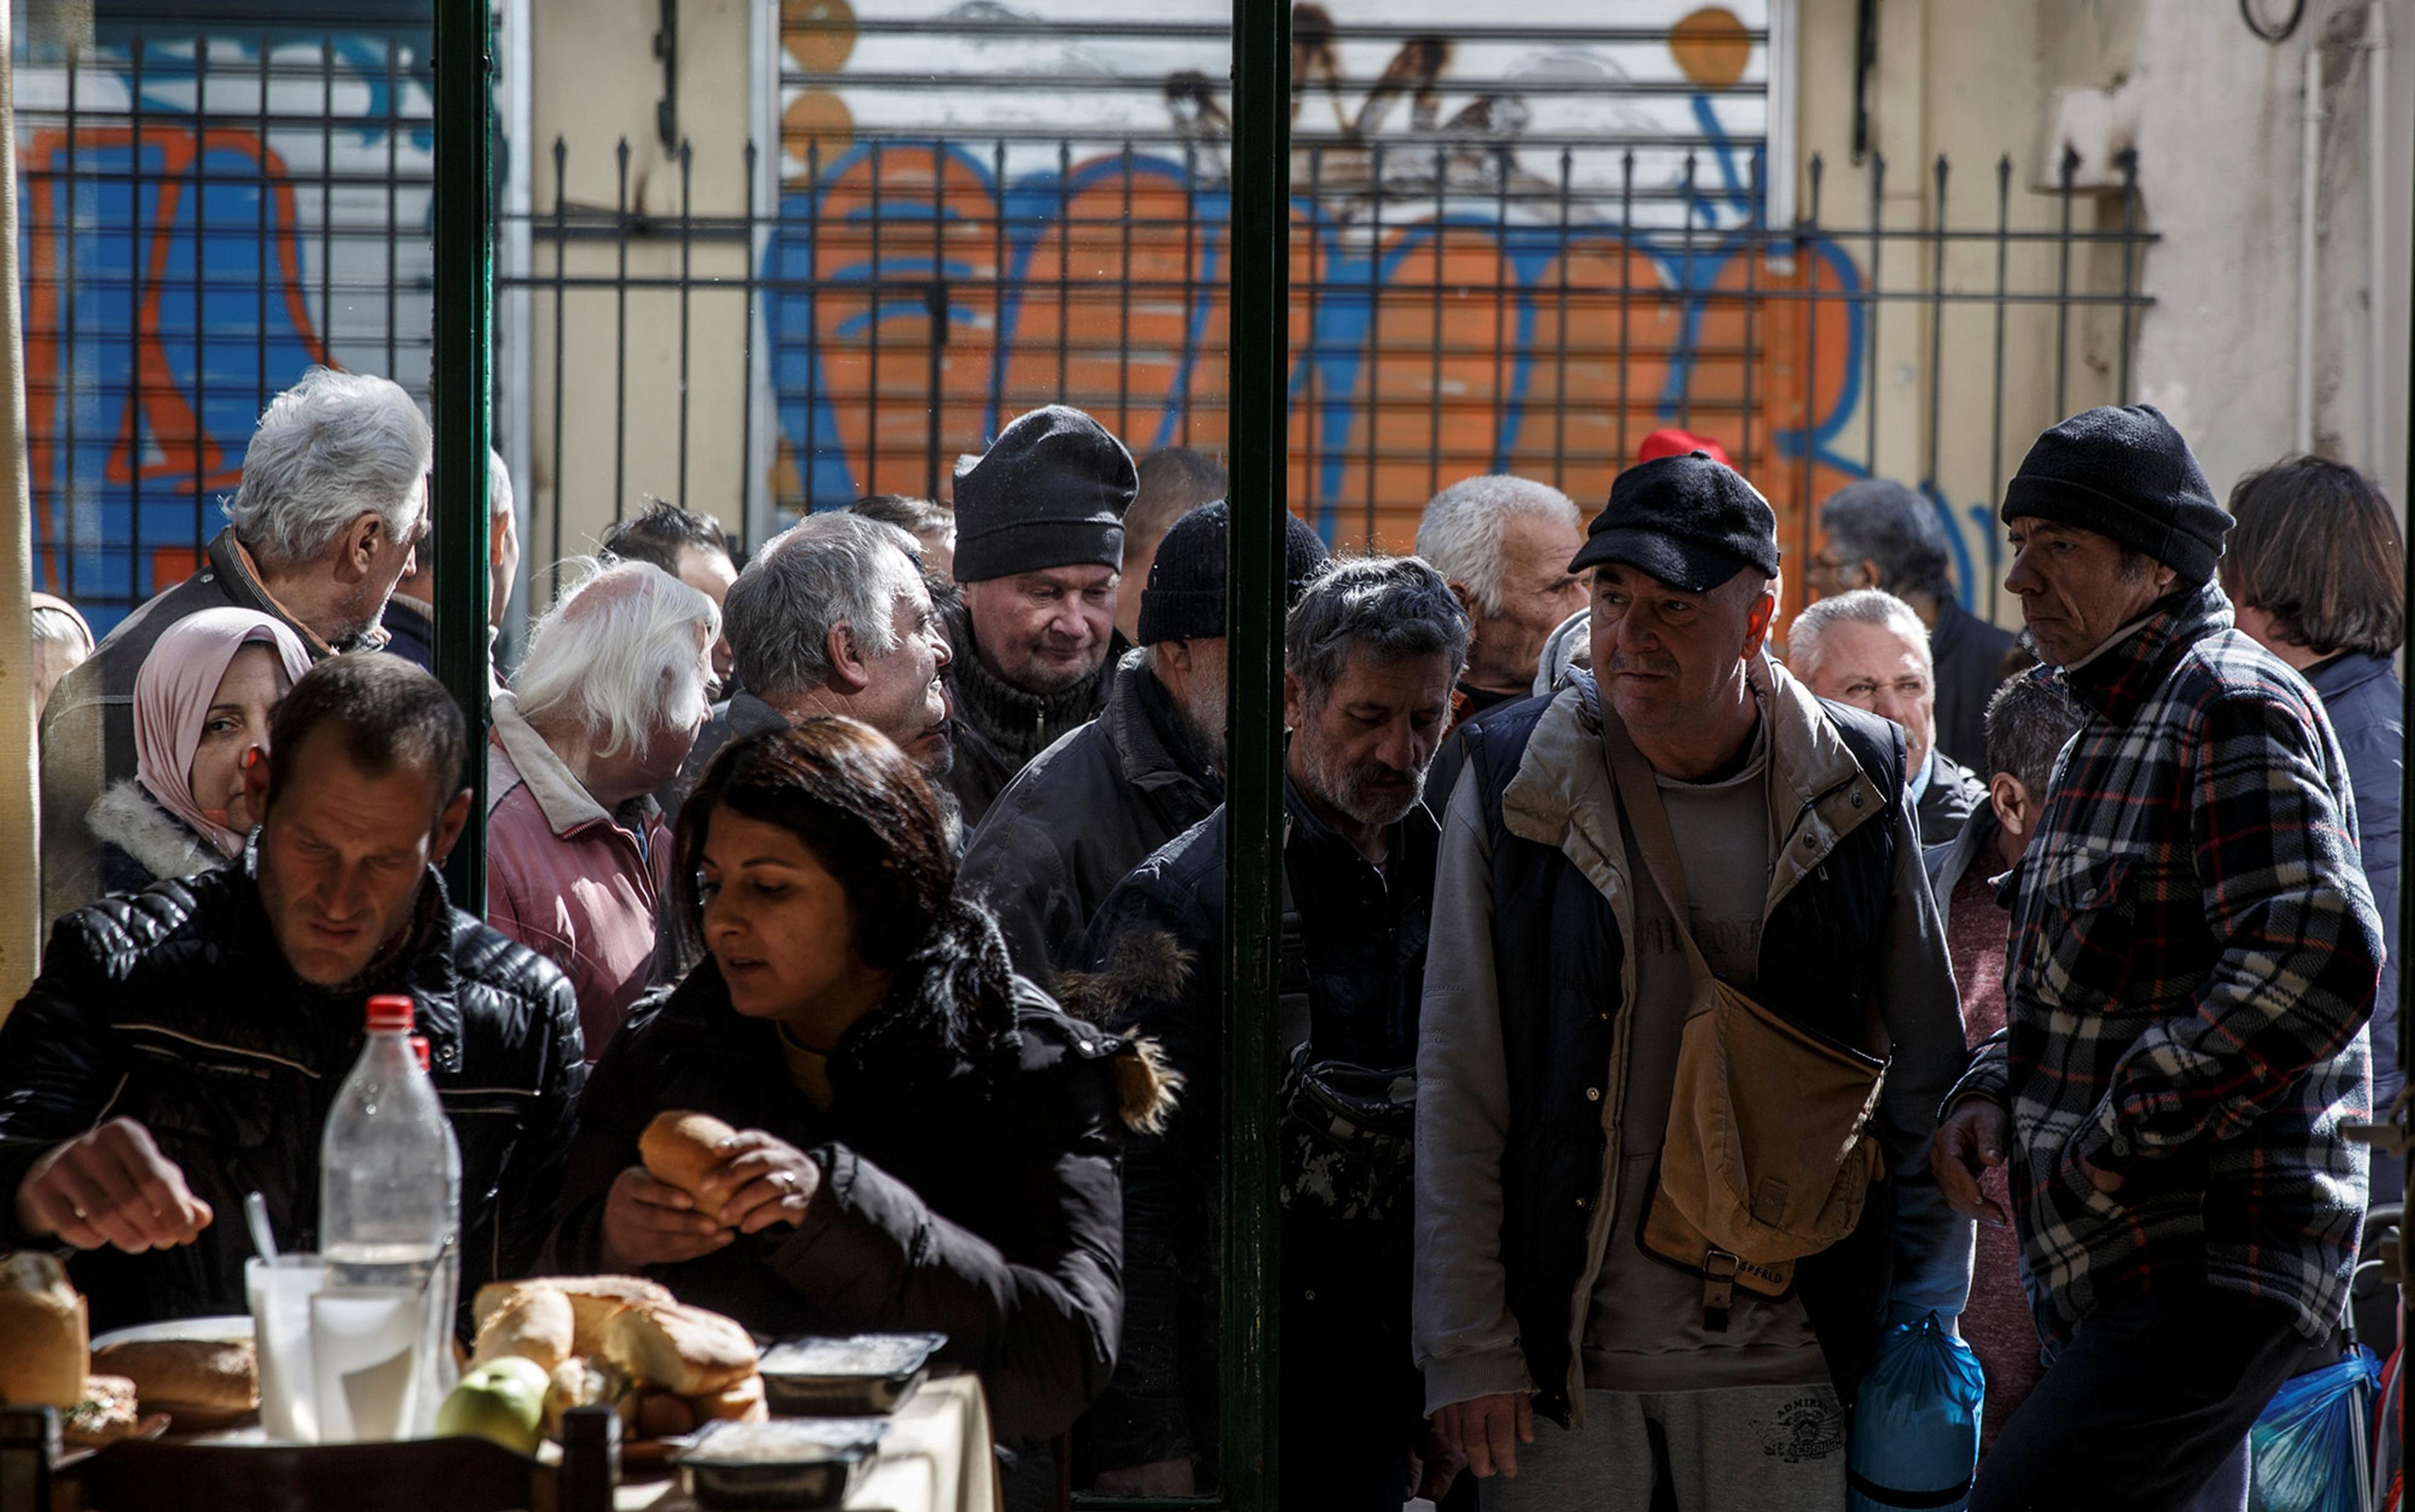 Seen from inside, a couple eat a basic meal whilst outside in an alleyway a queue of mostly older people wait their turn